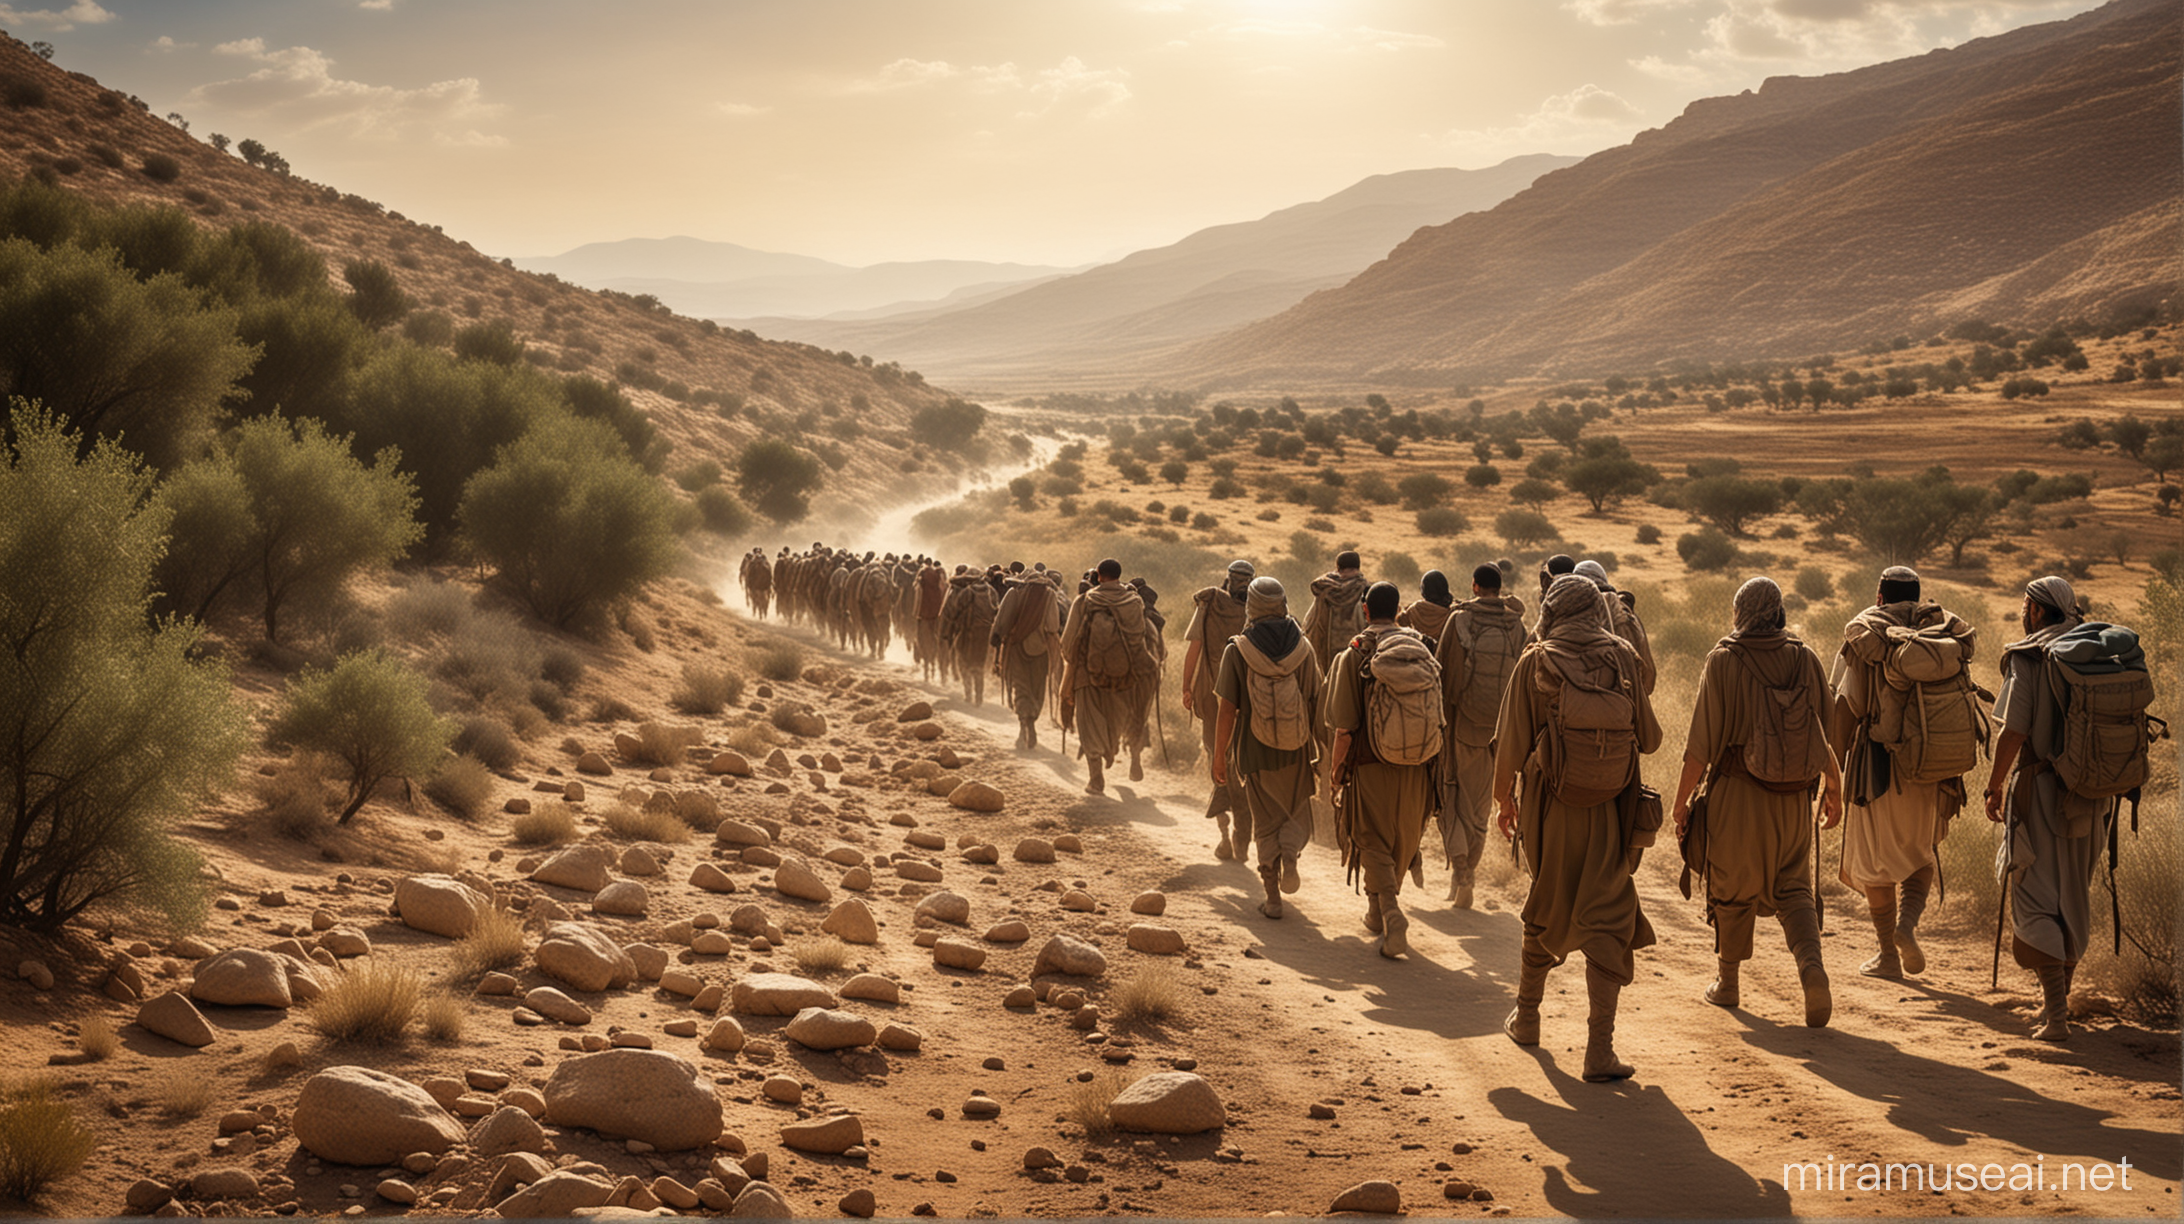 Journey through the Wilderness by the israelis on the way to the promised land in moses era